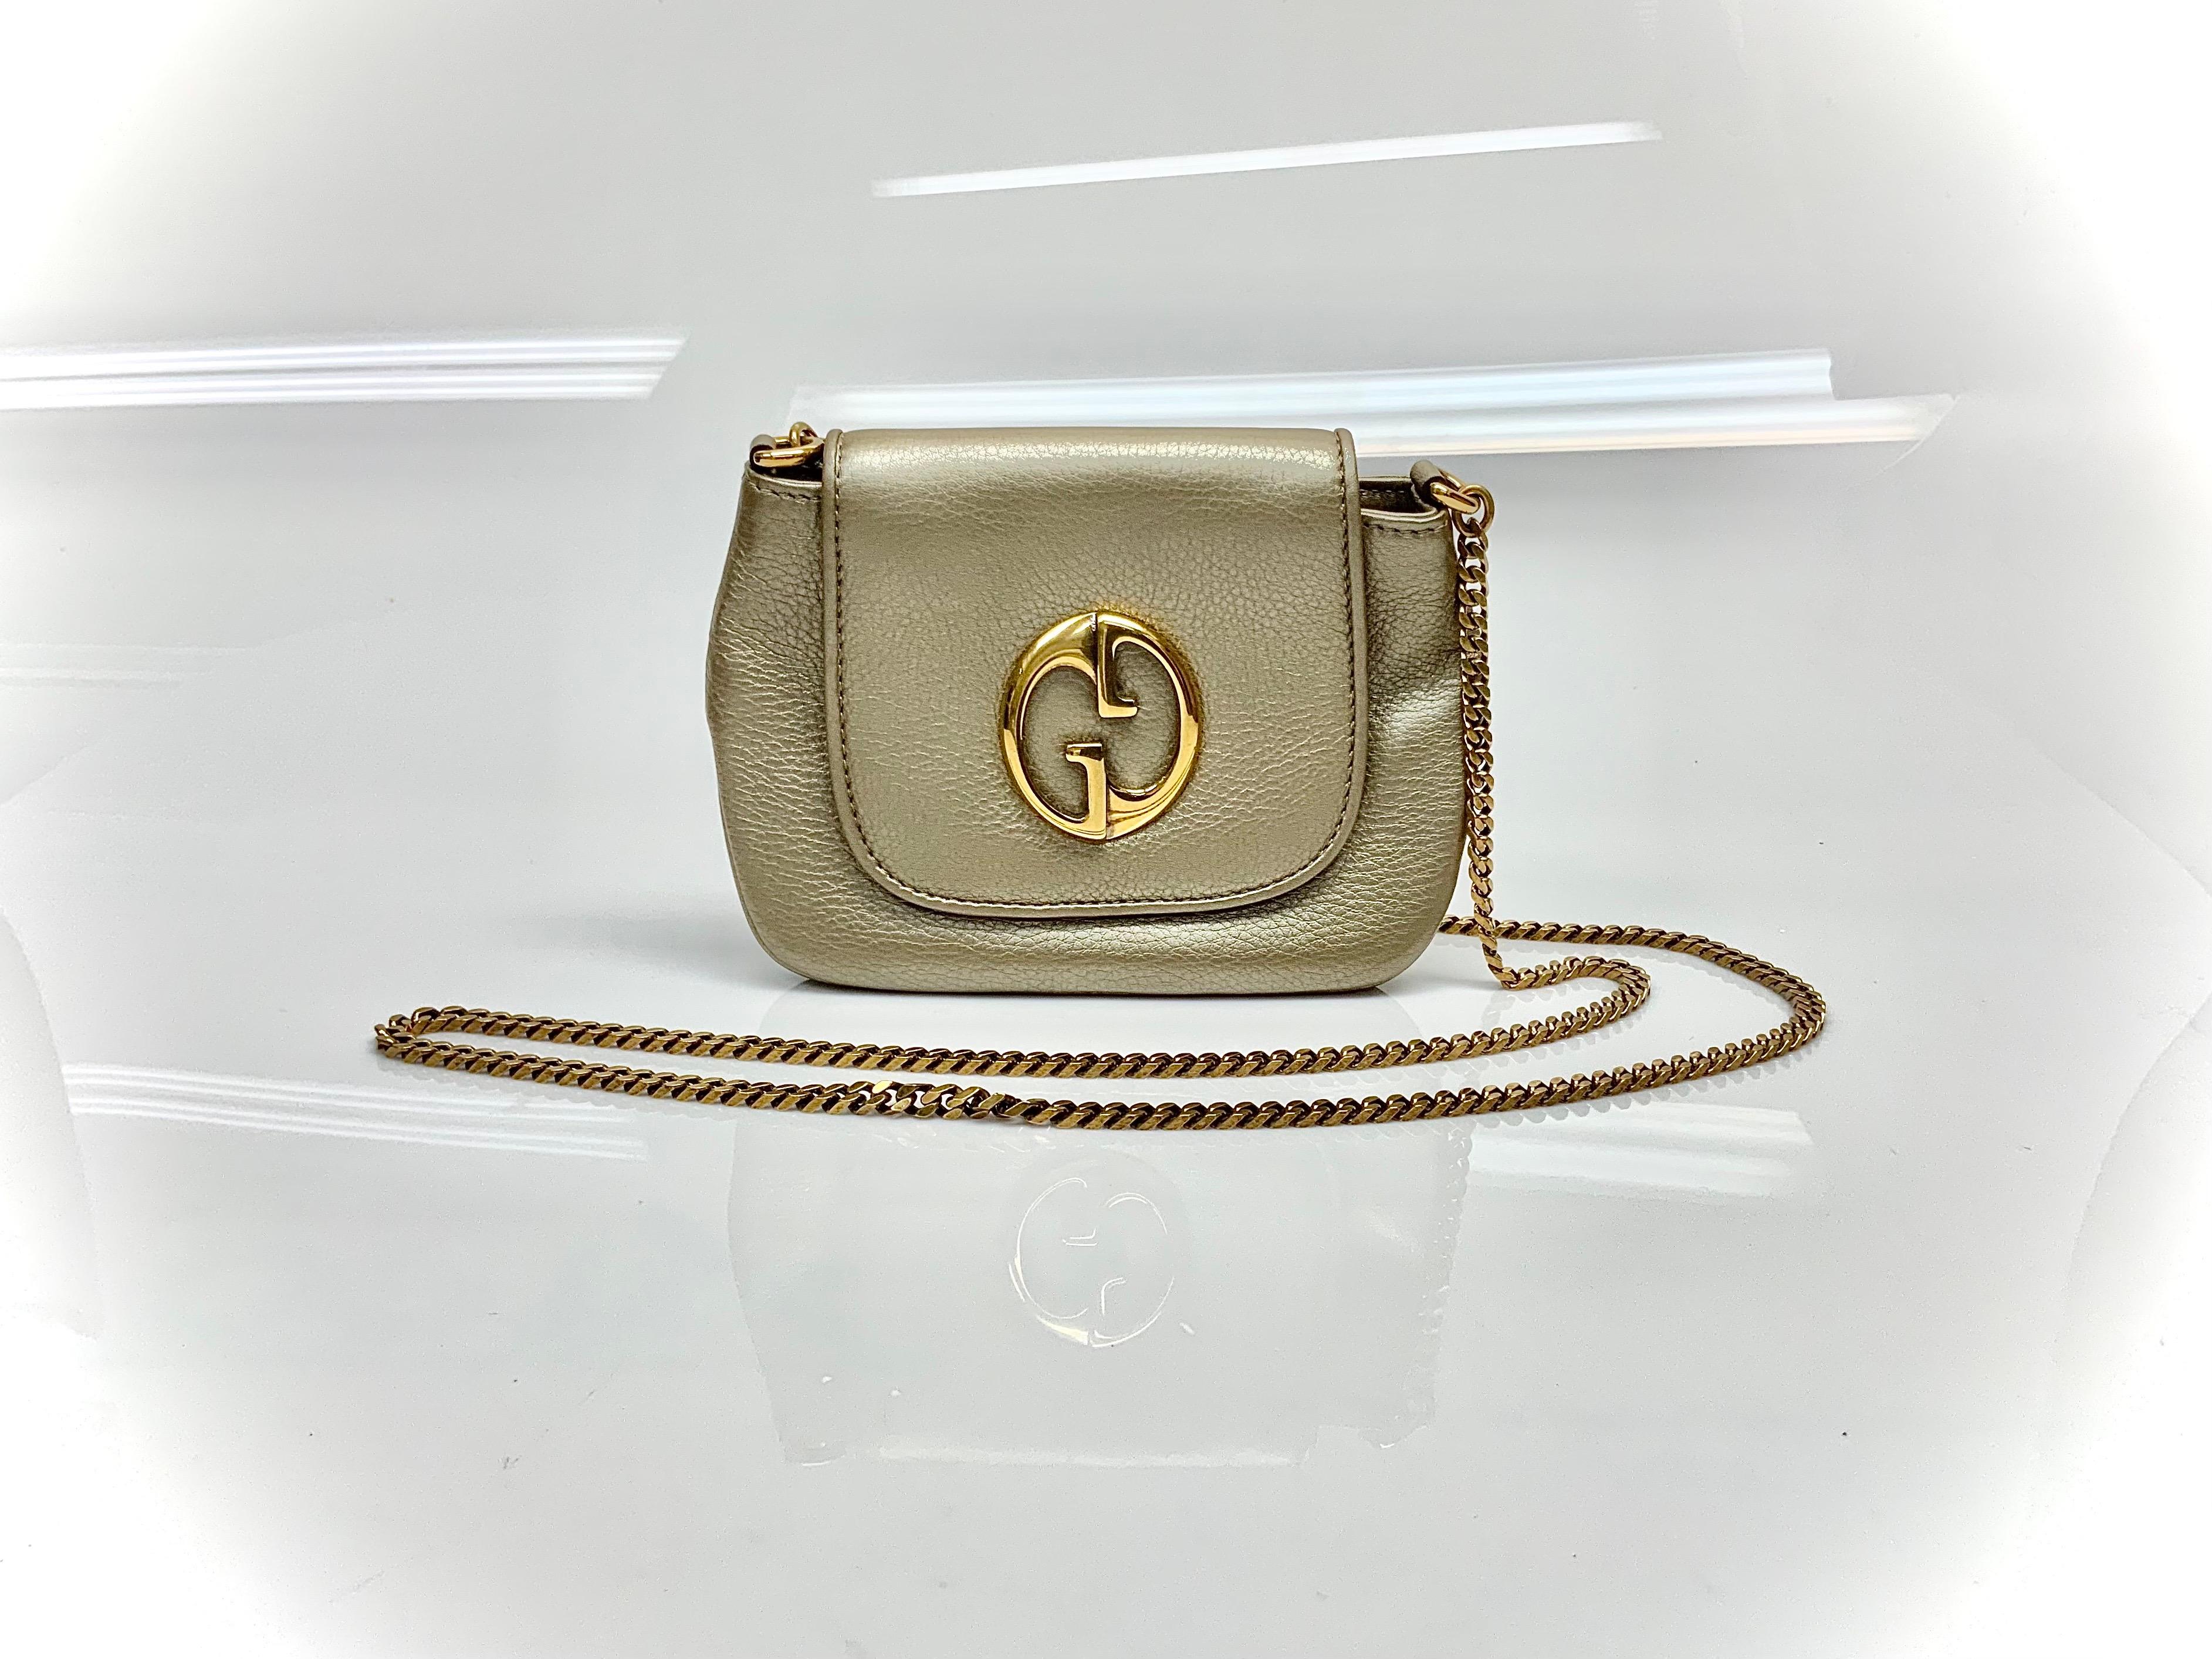 This beautiful bronze Gucci 1973 crossbody bag is perfect for everyday wear. Originates from the fall/winter 2010 season, this piece is in very good condition as it was carried by my client maybe a couple of times only. This crossbody bag features a